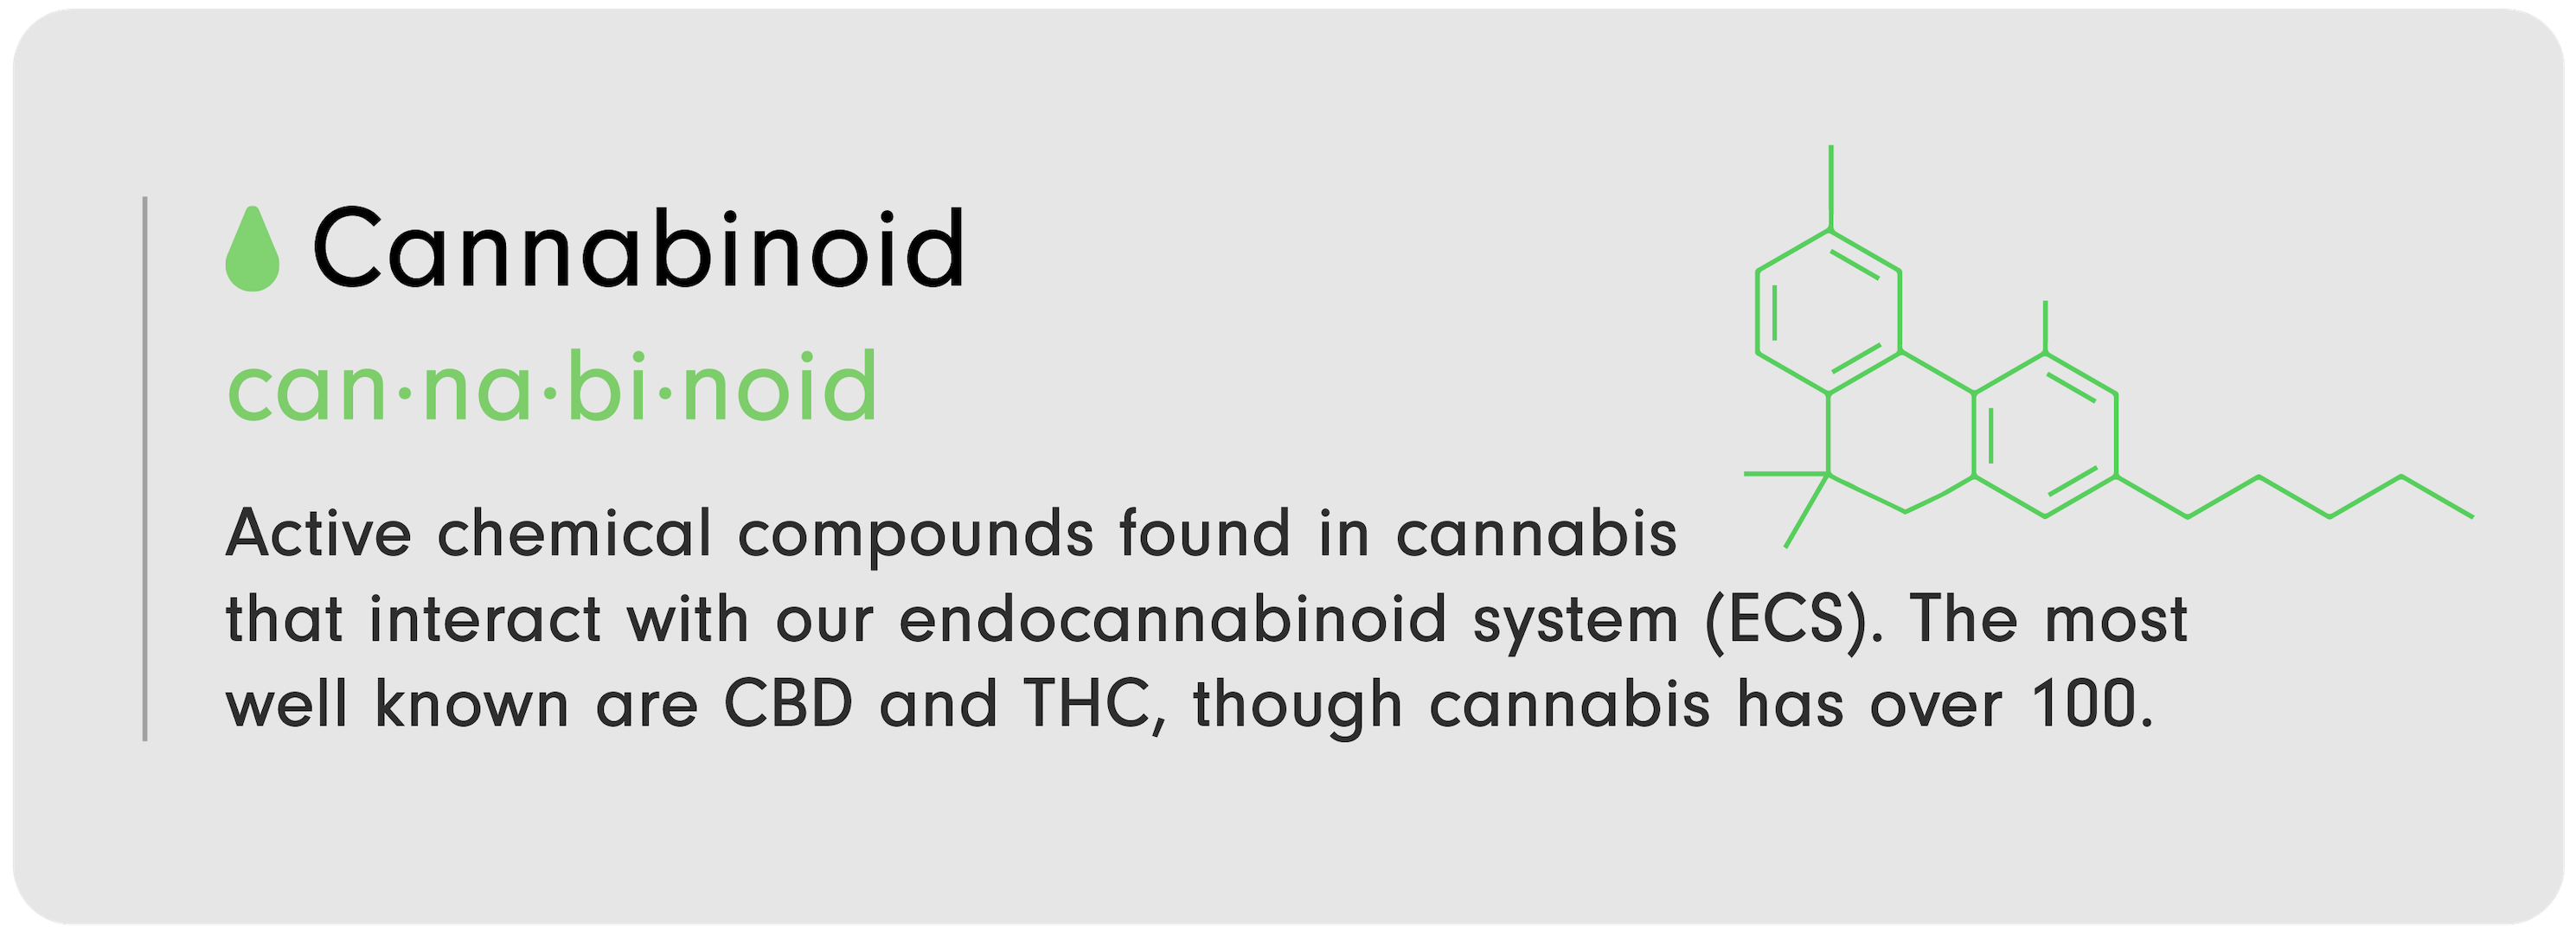 CBD 101 infographic by LEVO that reads, "Cannabinoid: Active chemical compounds found in c----bis that interact with our endocannabinoid system (ECS). The most well known are CBD and THC, though c----bis has over 100."